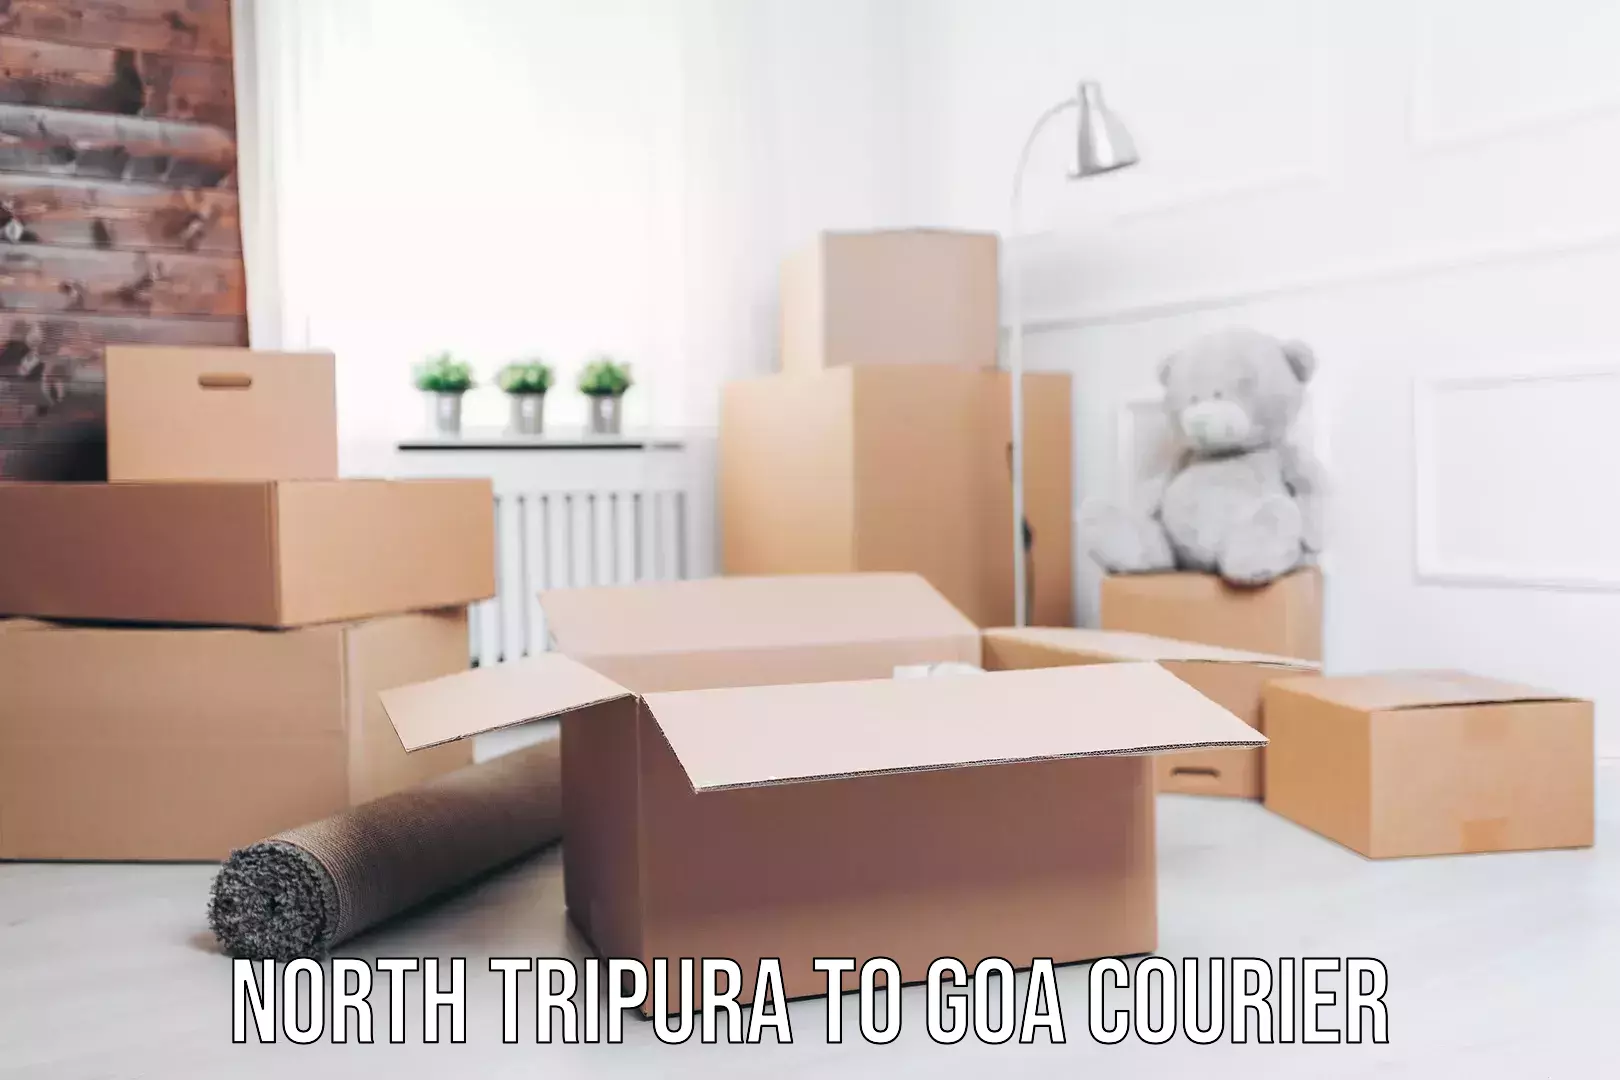 Customer-oriented courier services North Tripura to Goa